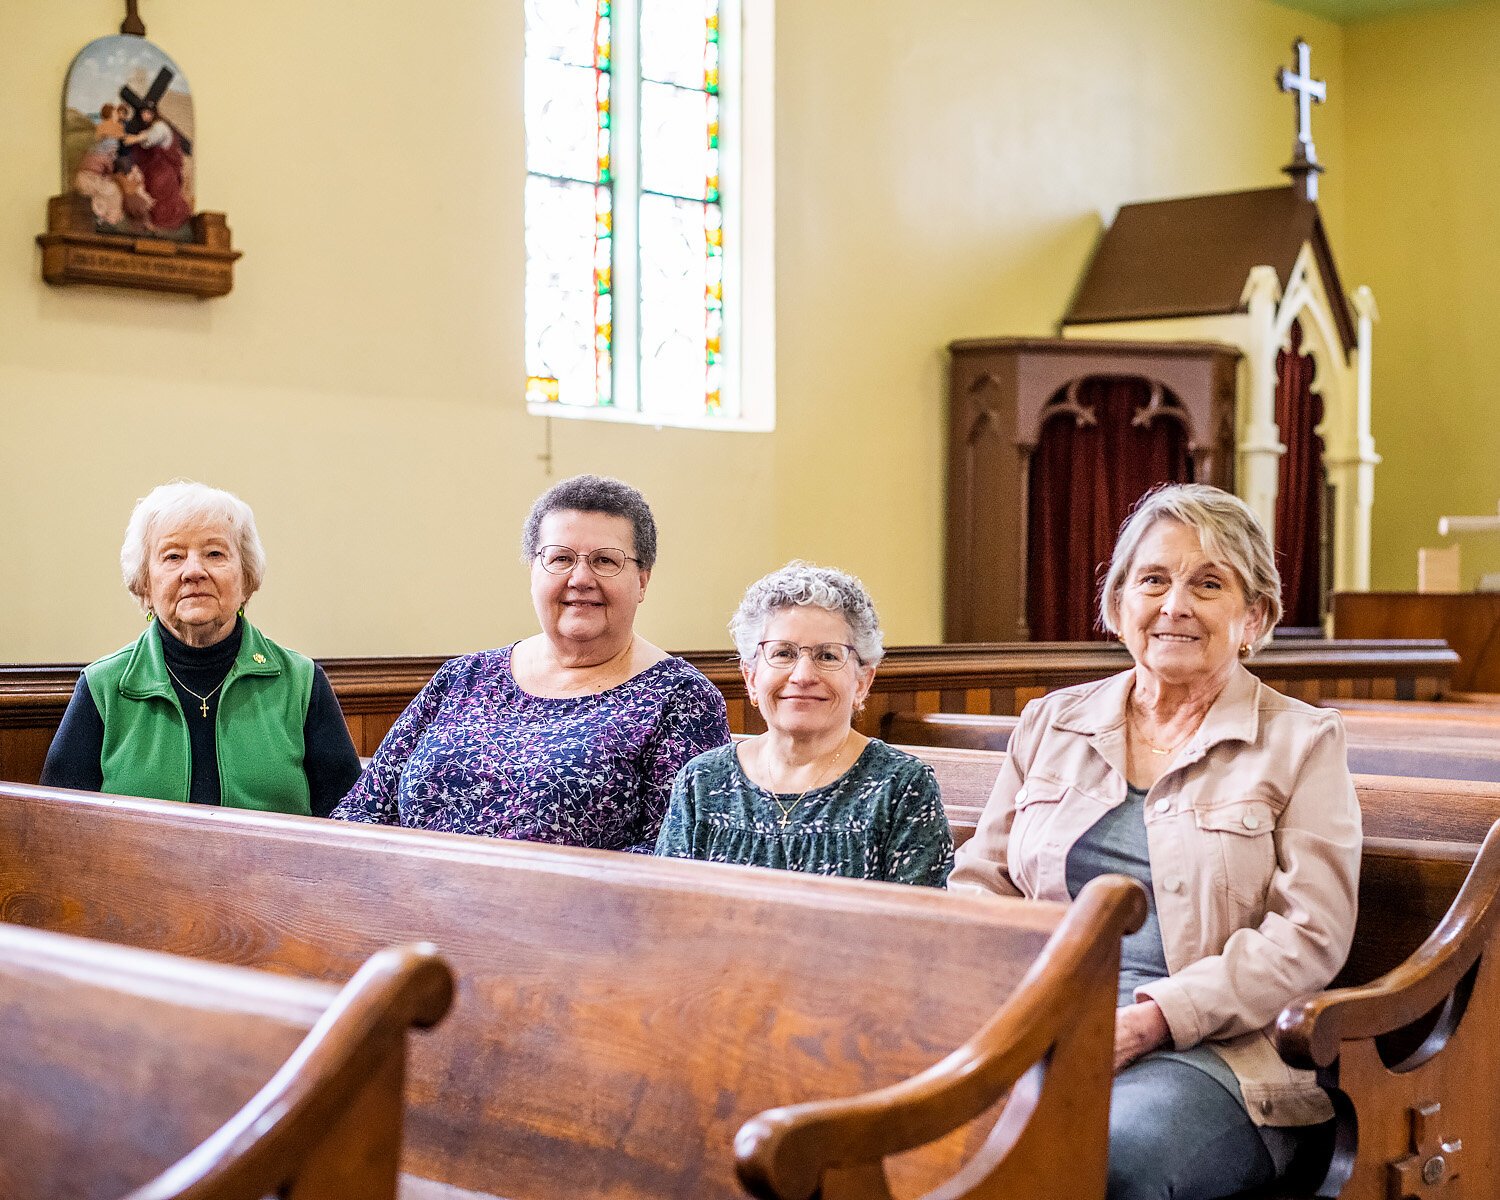 The volunteer group, Friends of St. Patrick, work to keep the history of the church alive.